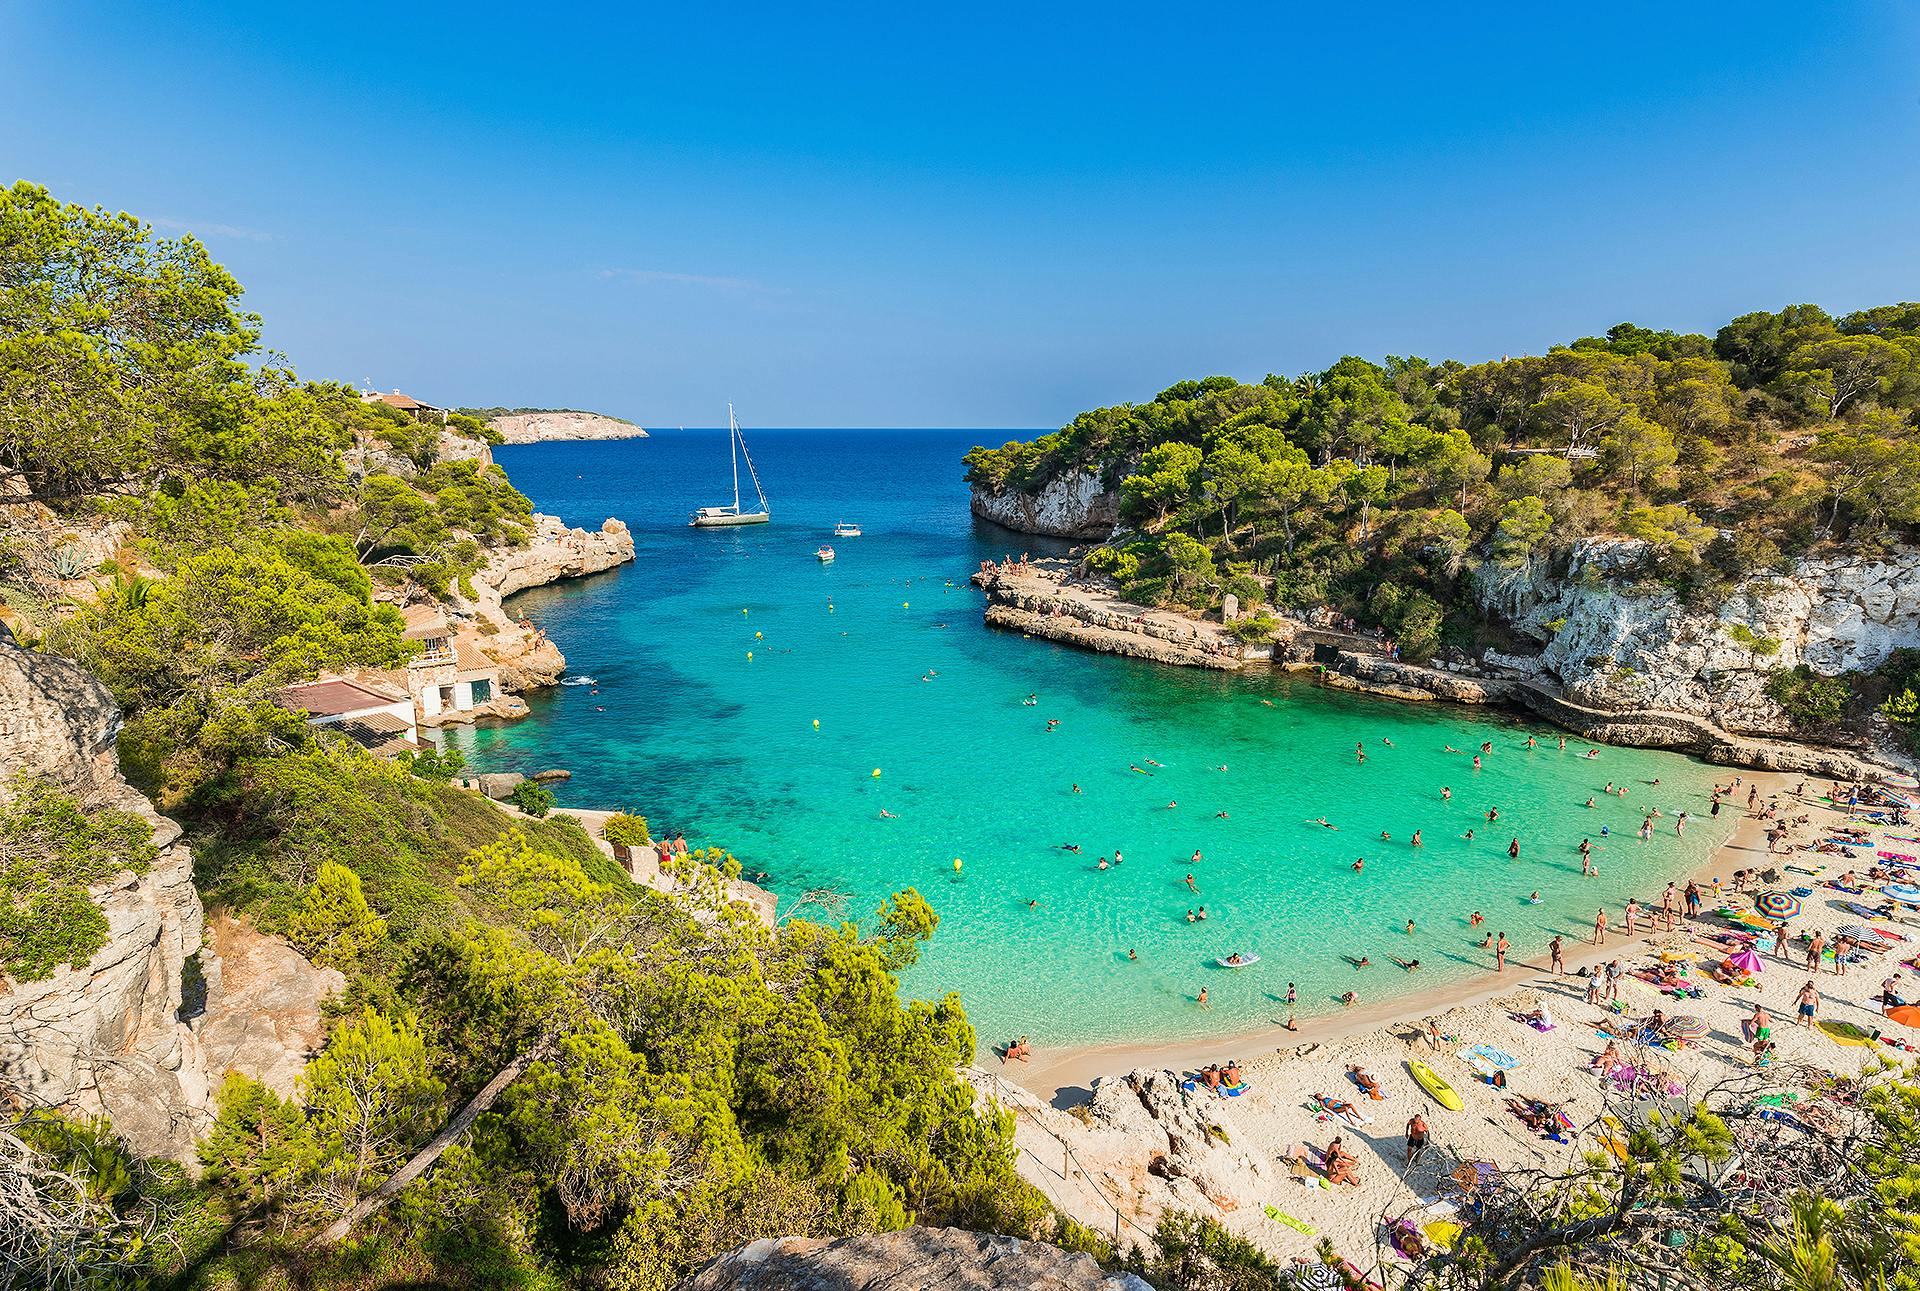 On the sunny side – Cala Llombards